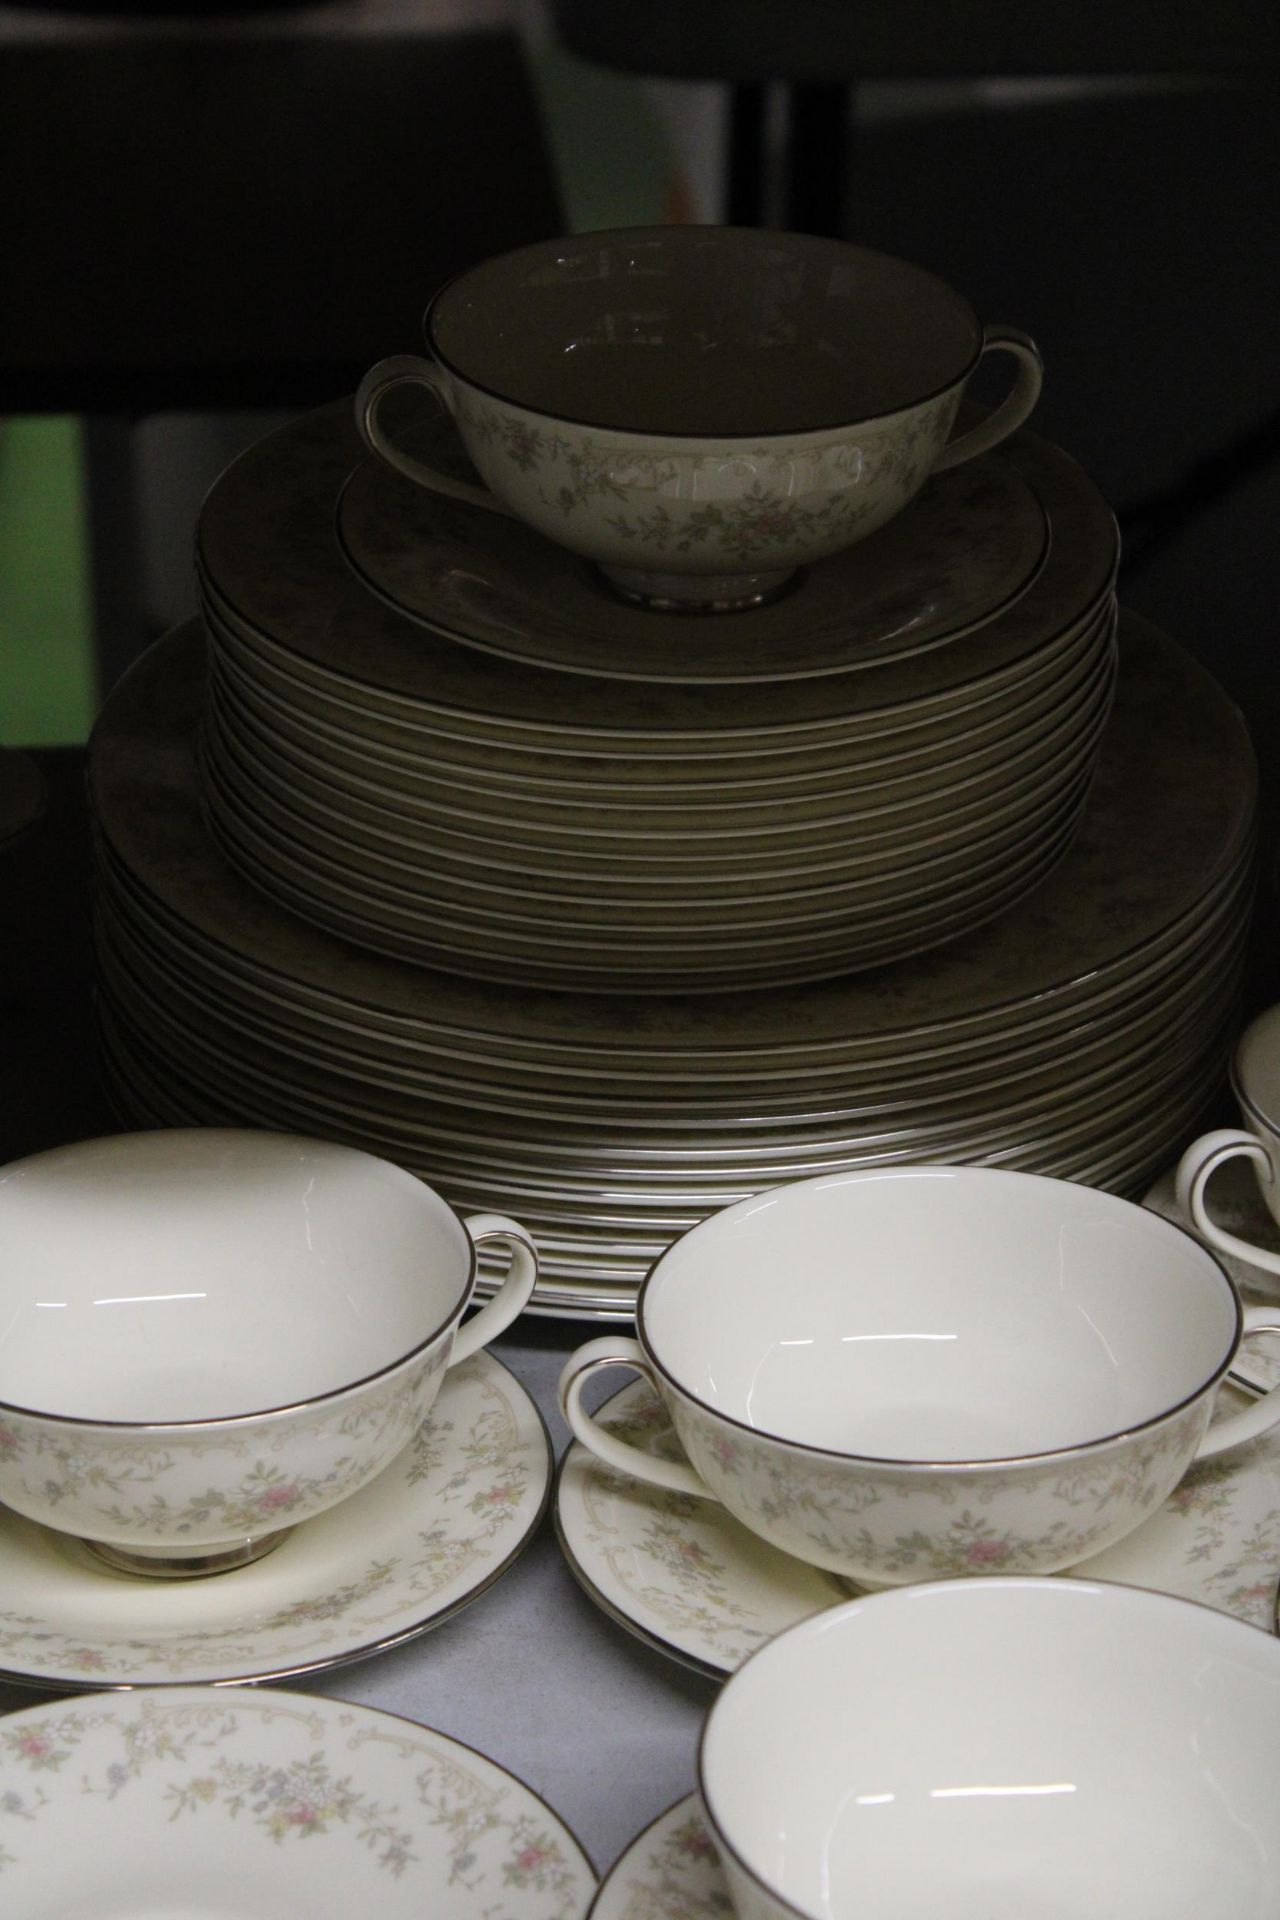 A ROYAL DOULTON 'DIANA' DINNER SERVICE TO INCLUDE SERVING TUREENS, VARIOUS SIZES OF PLATES, SOUP - Image 2 of 6